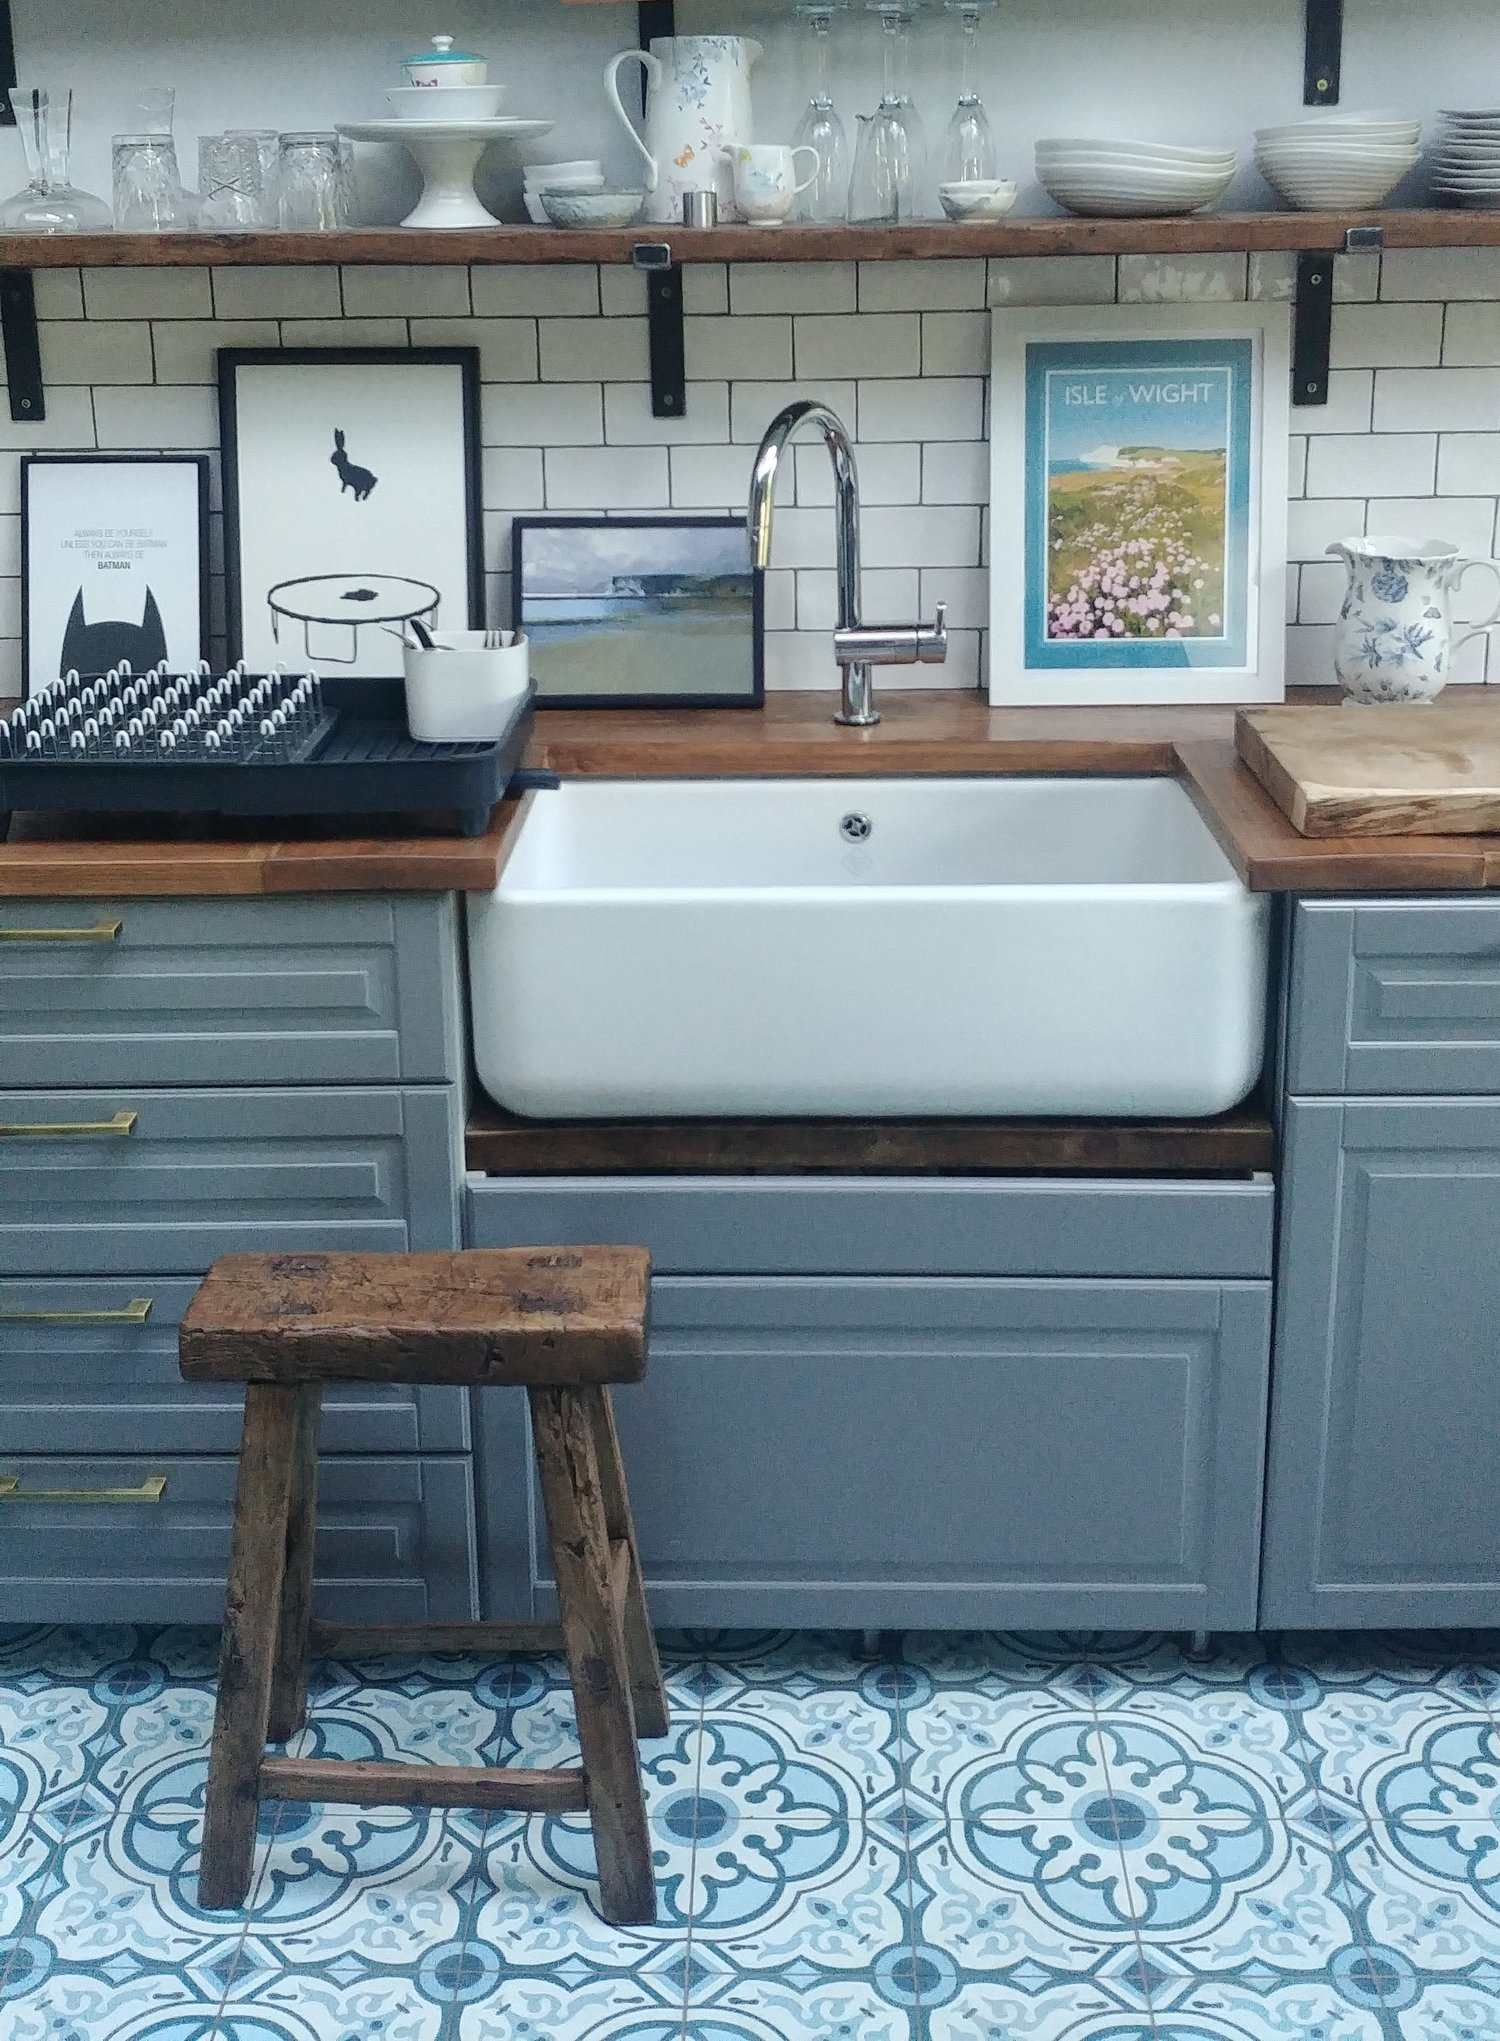 hints and tips for how to diy install an ikea kitchen